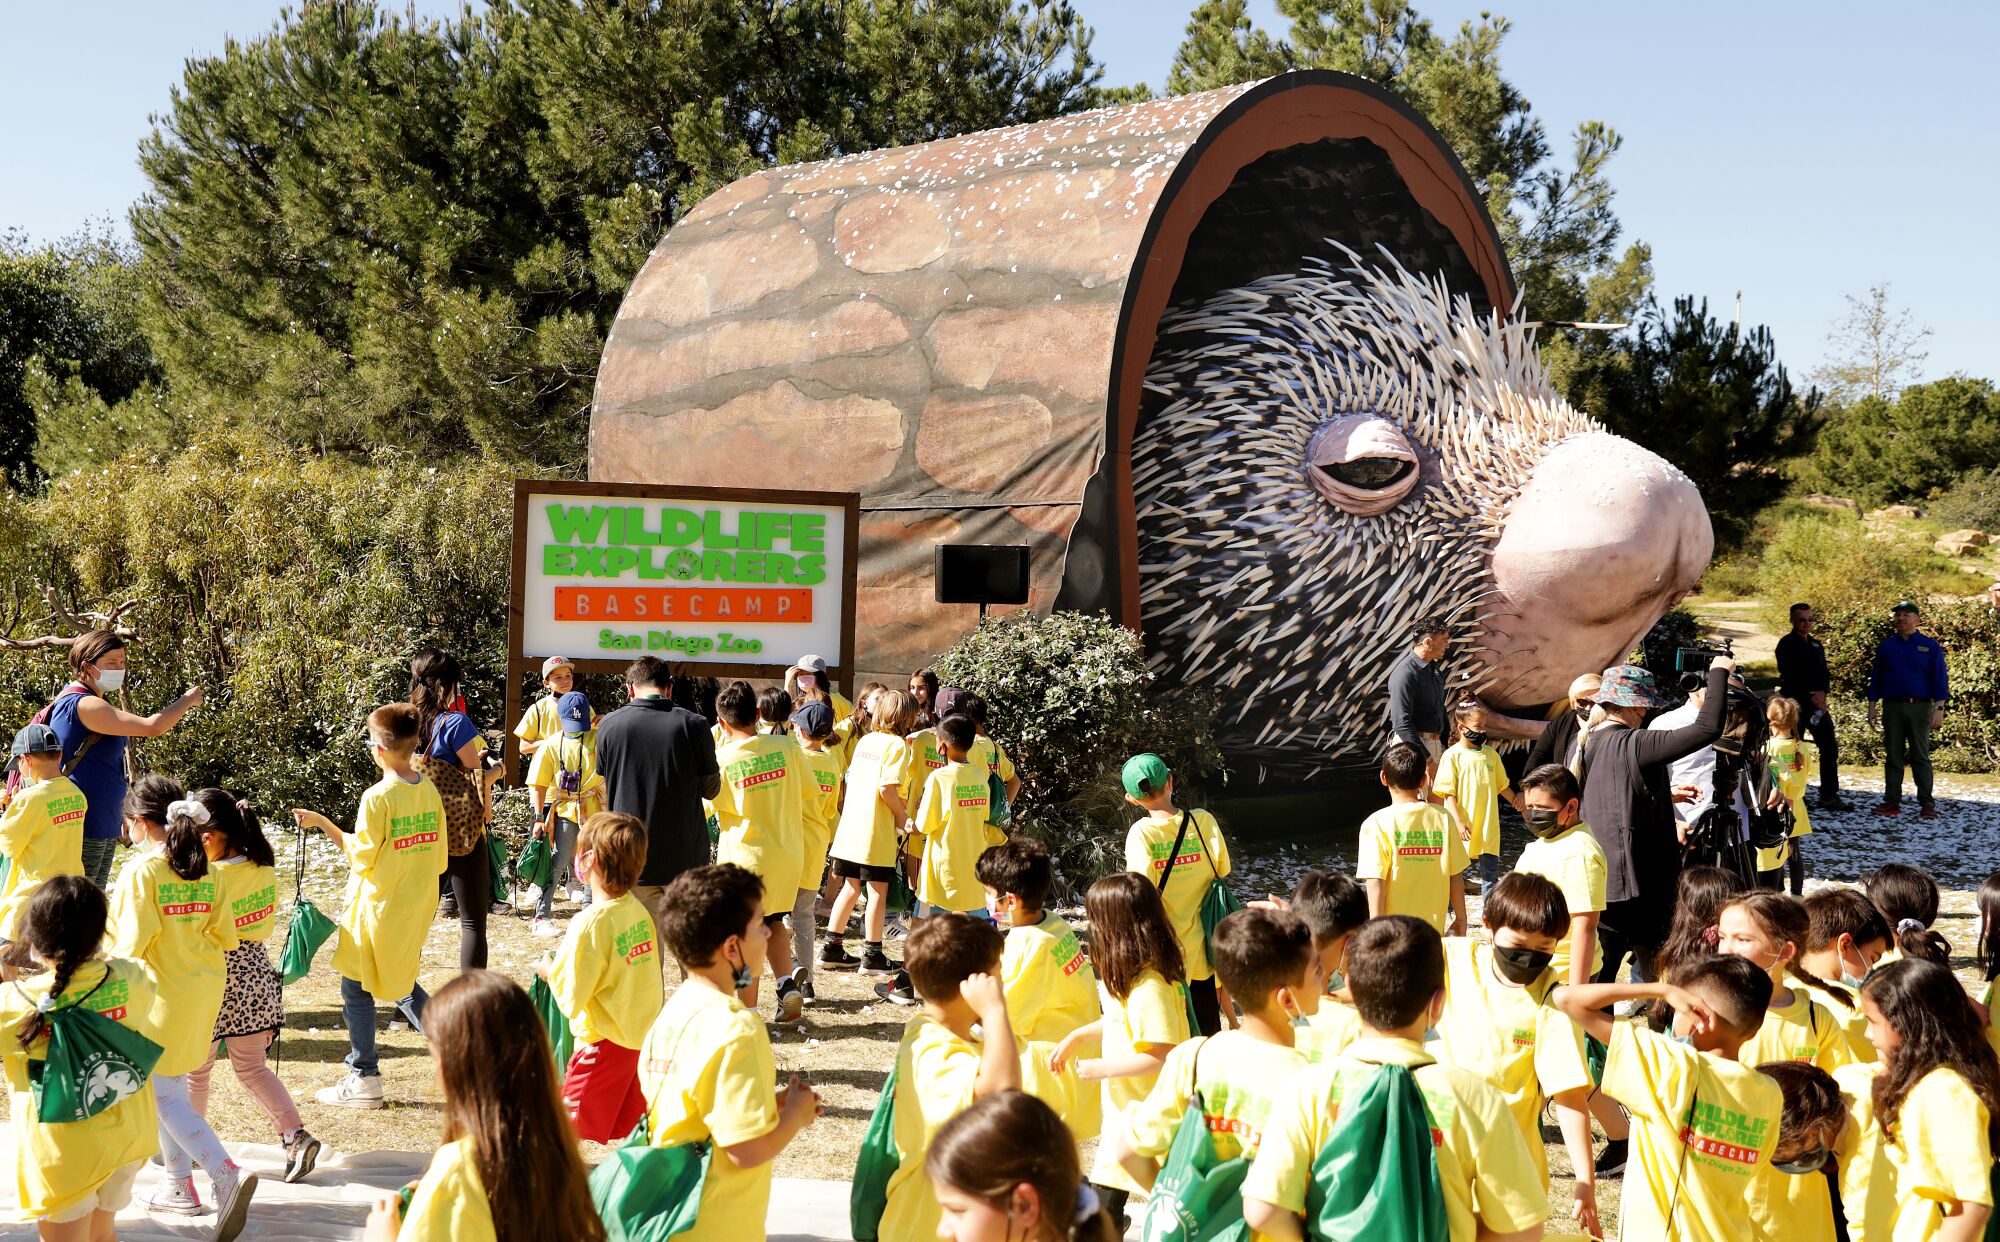 Schoolchildren at the unveiling of Percy the Porcupine from Jim Henson's Creature Shop at Elysian Park on March 1, 2022